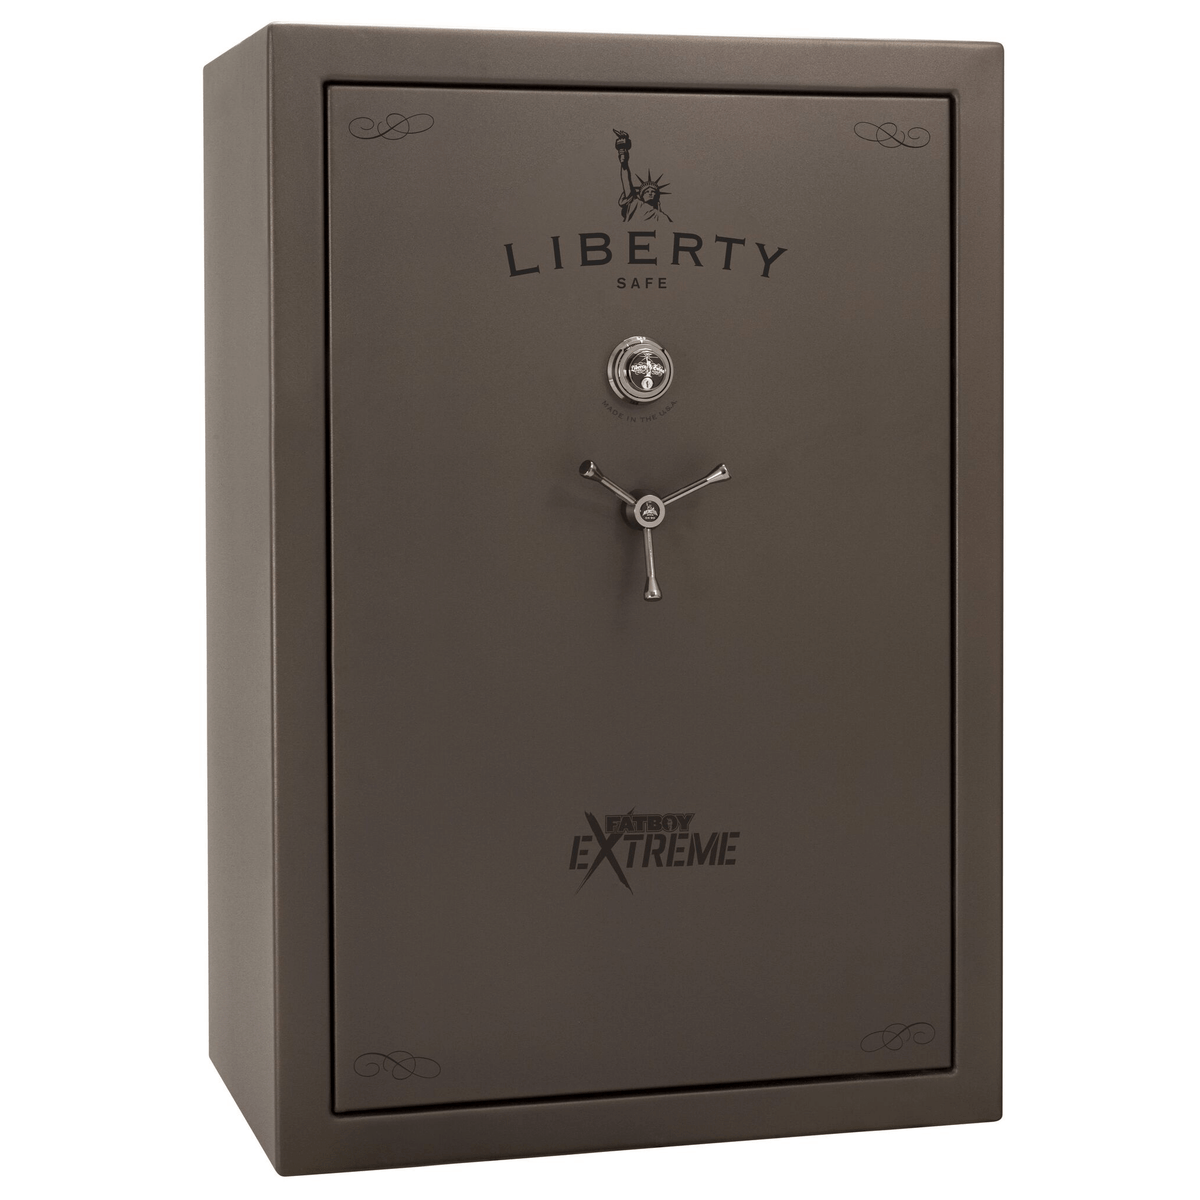 Lincoln Fatboy Extreme 64XT Safe in Textured Bronze with Black Chrome Mechanical Lock.